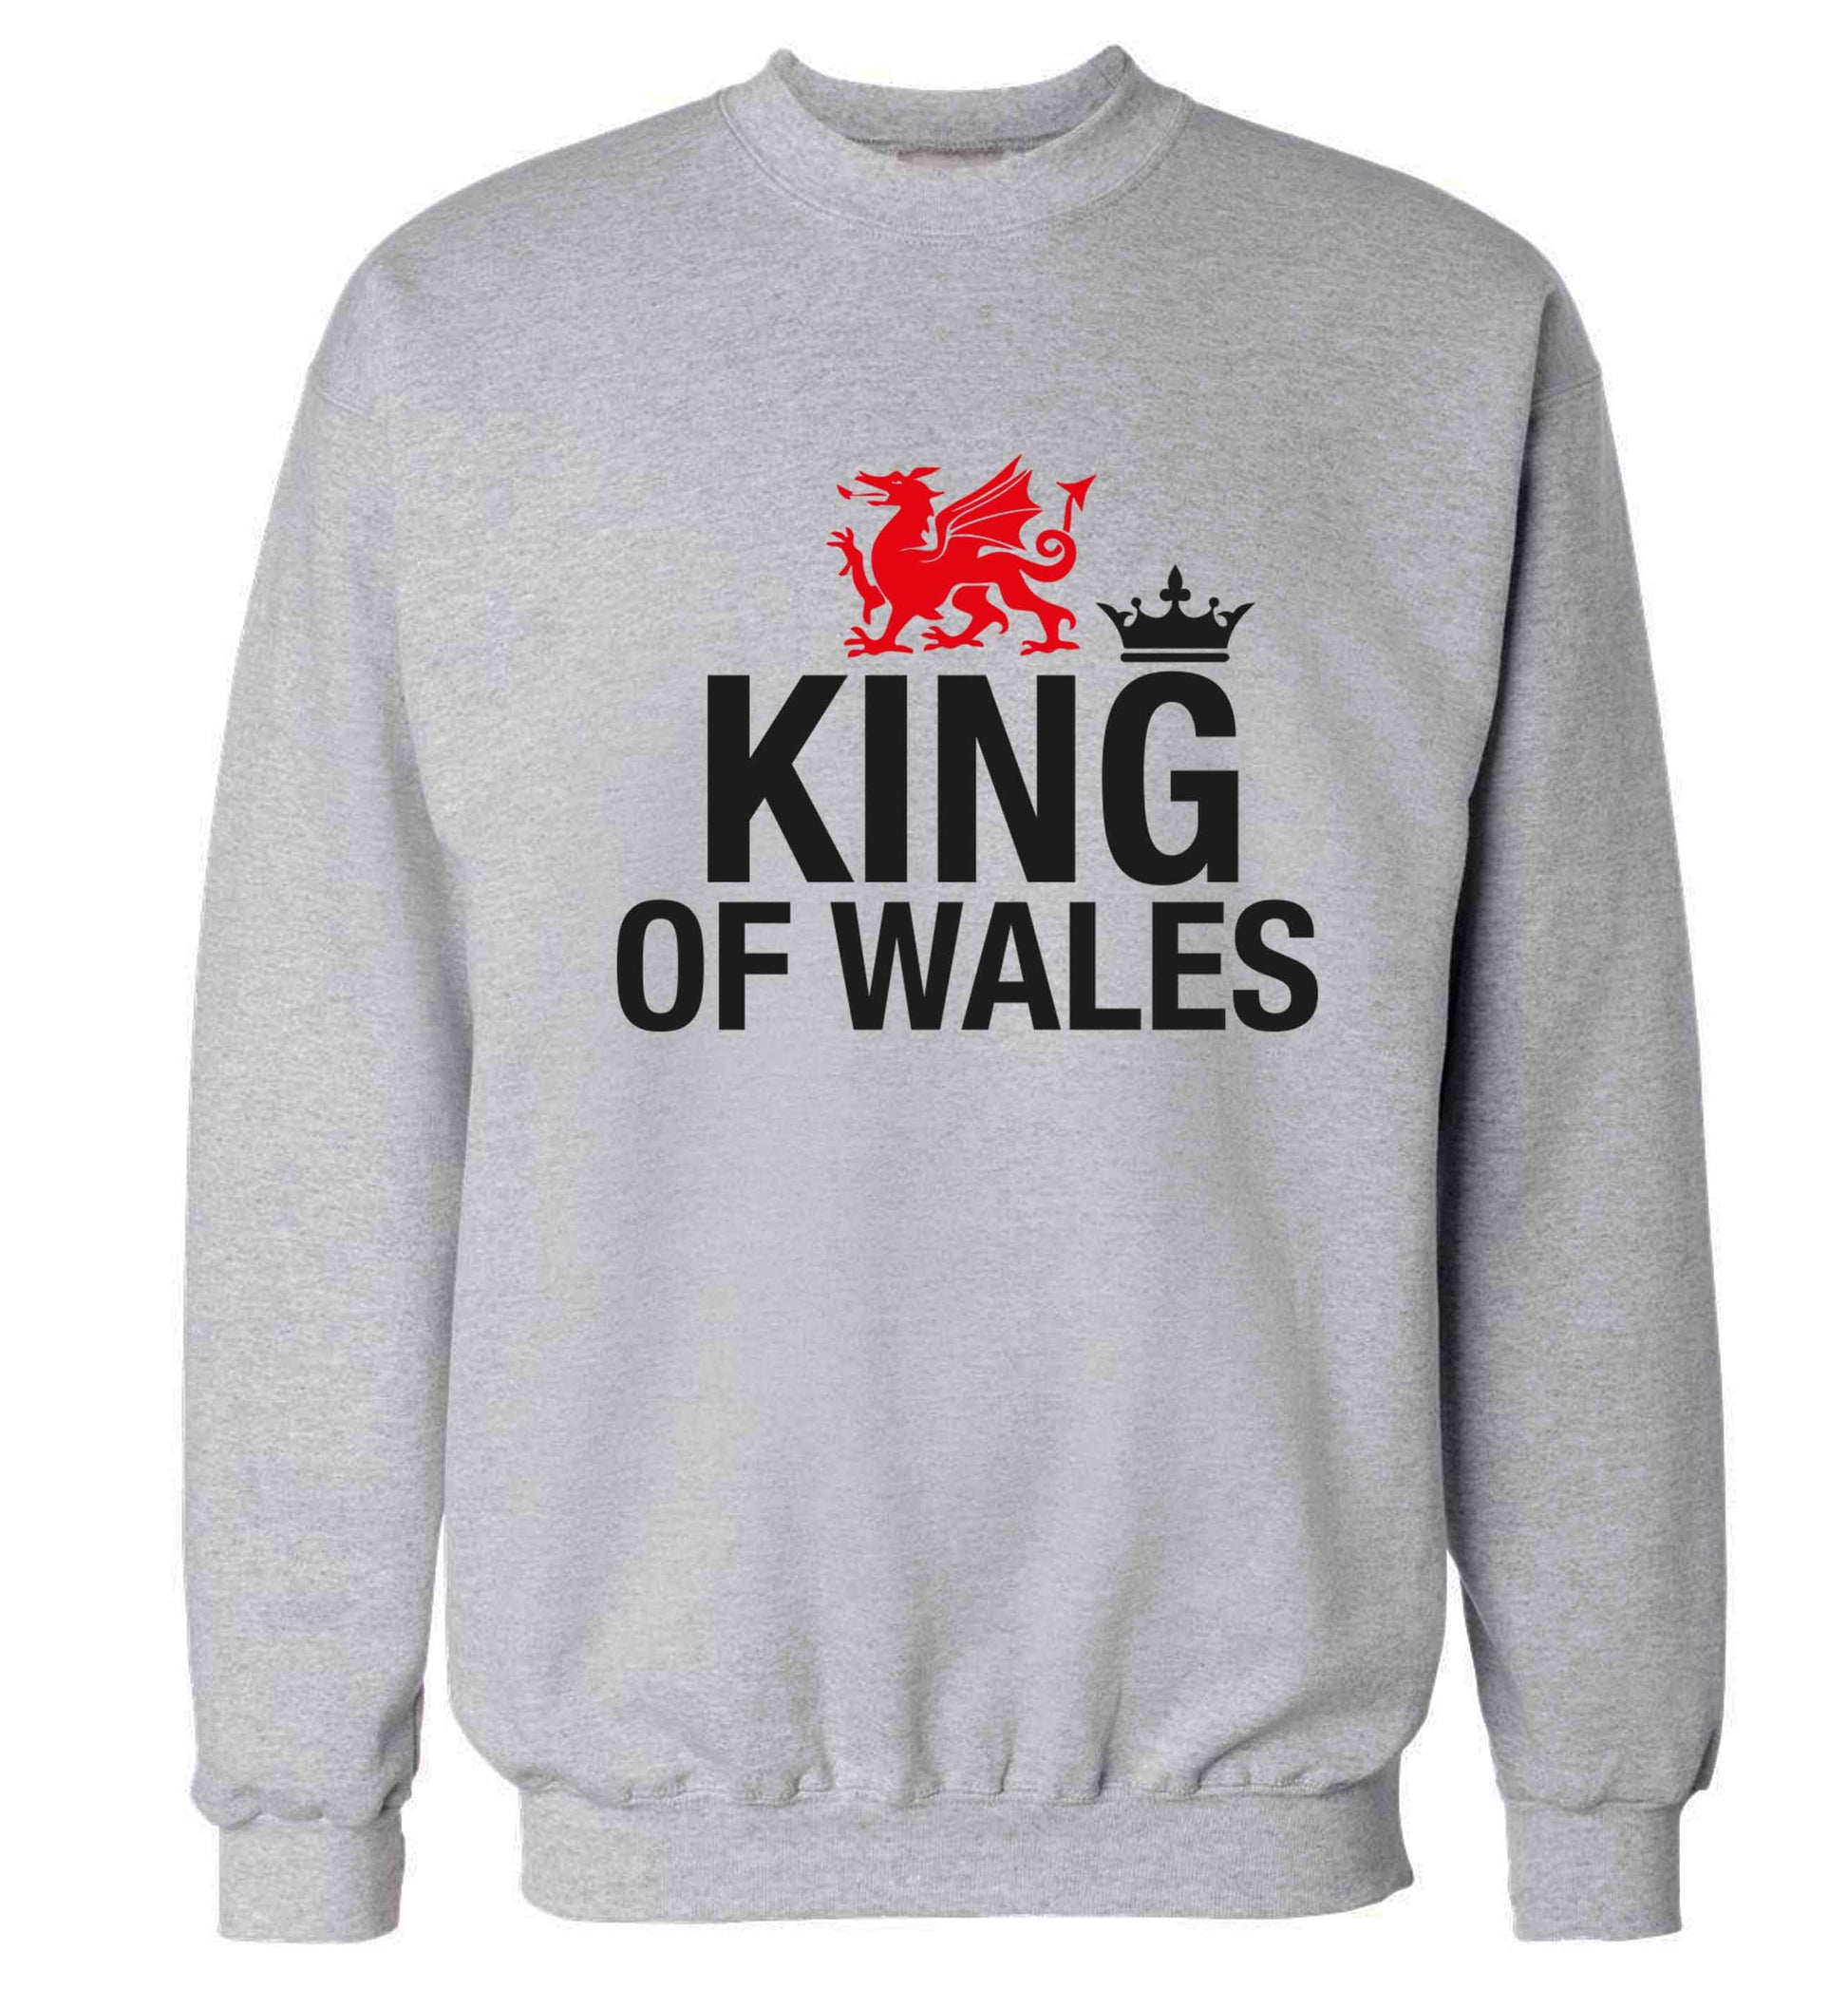 King of Wales Adult's unisex grey Sweater 2XL